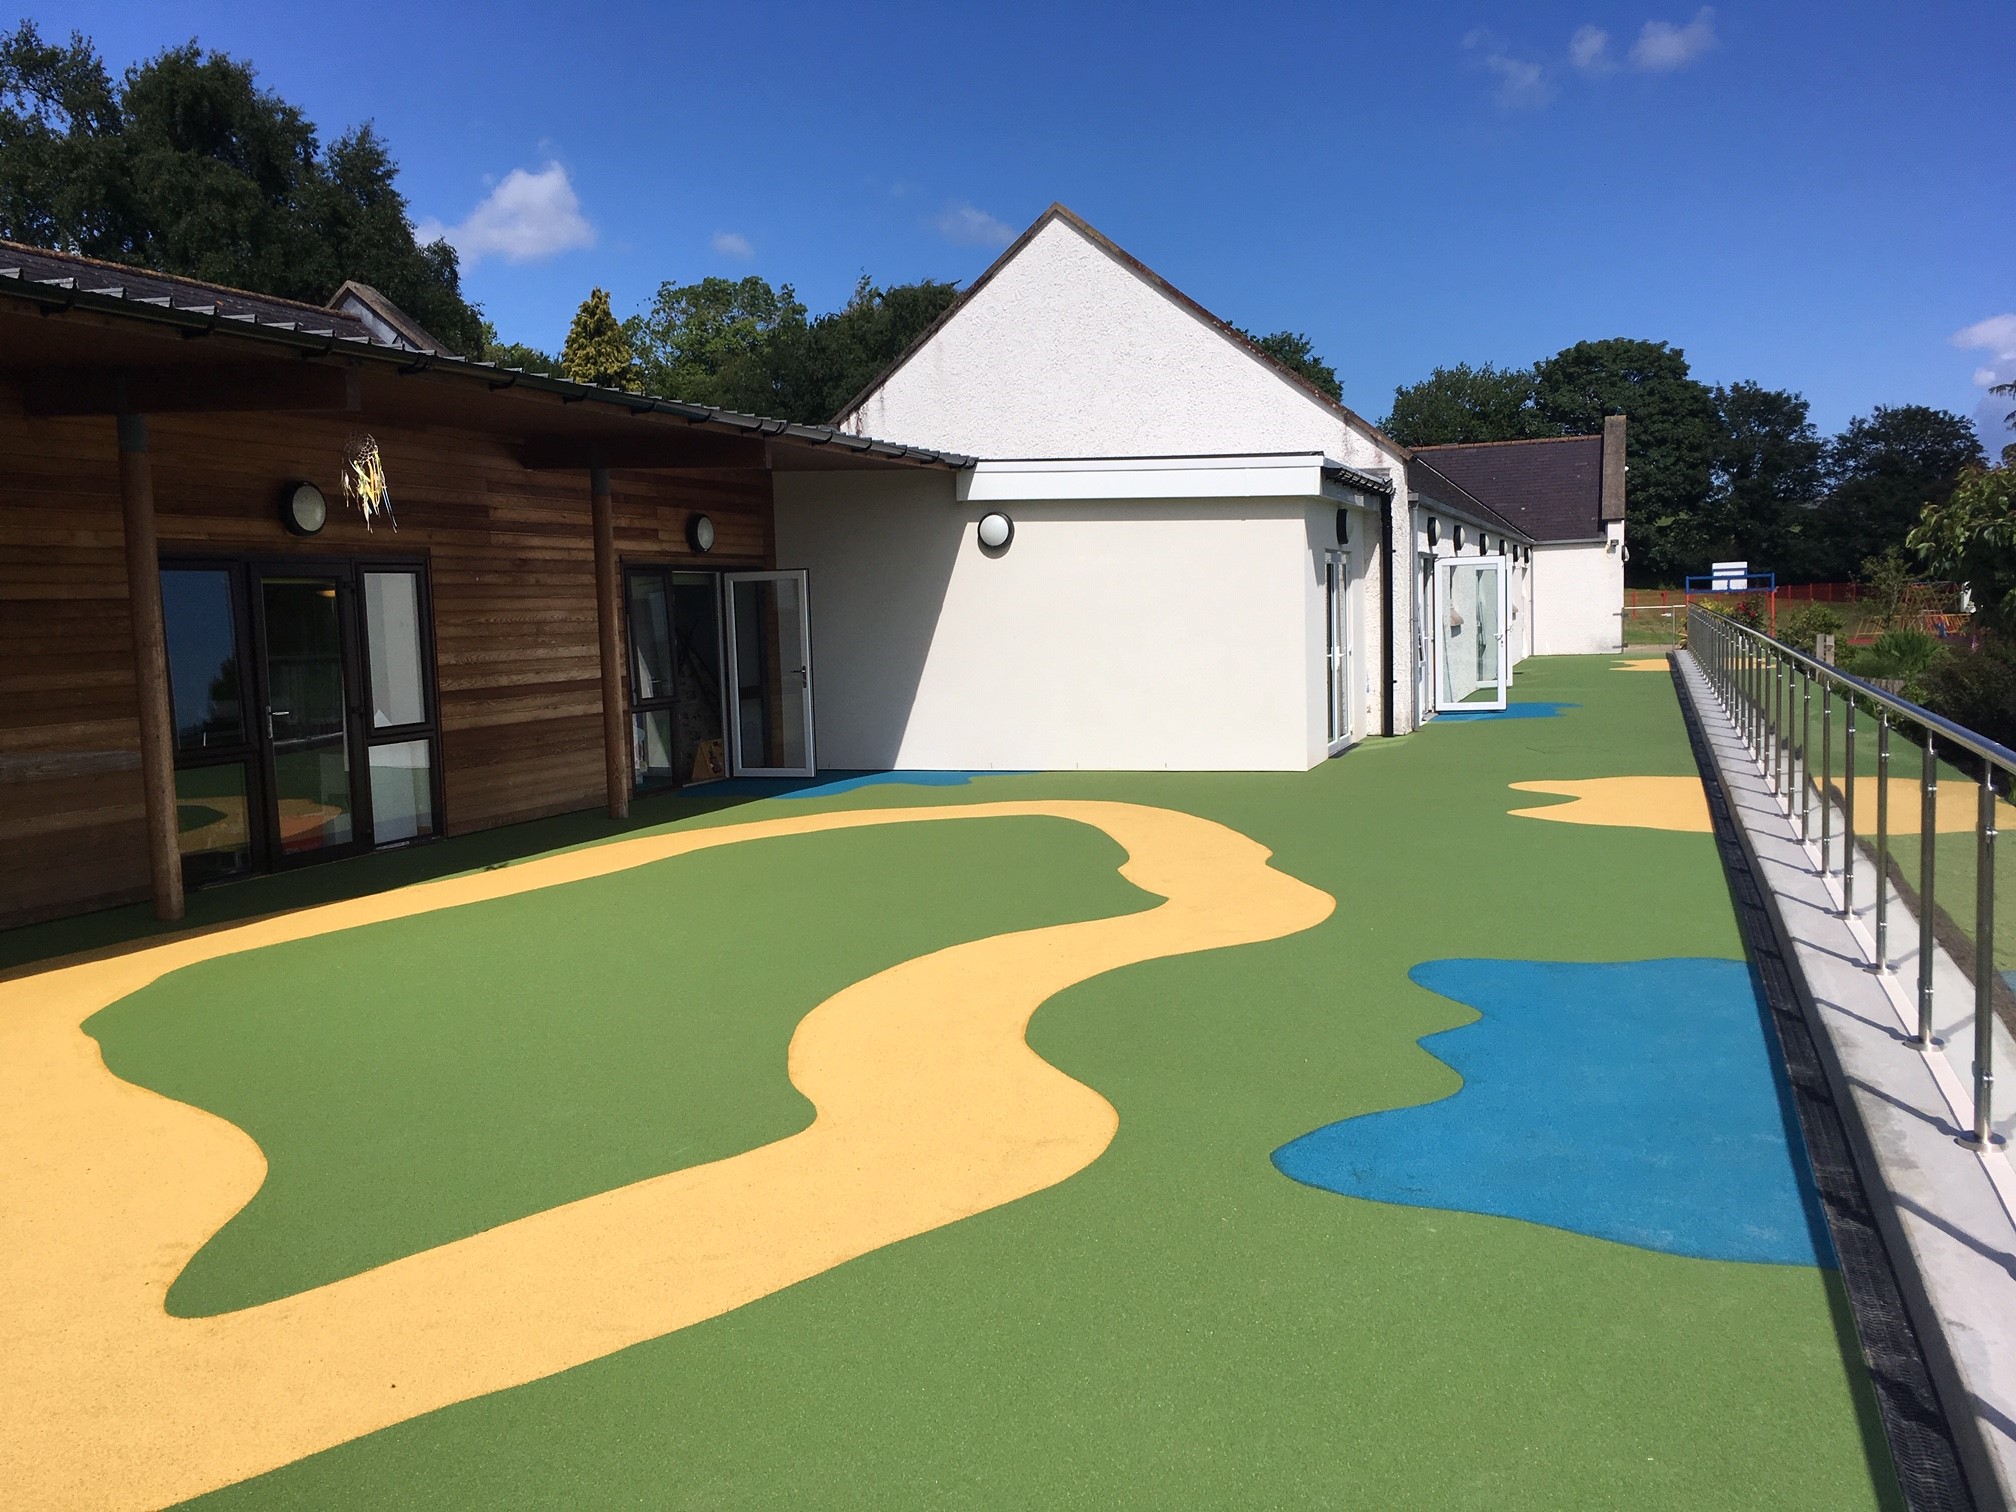 New EWI system for children’s hospice